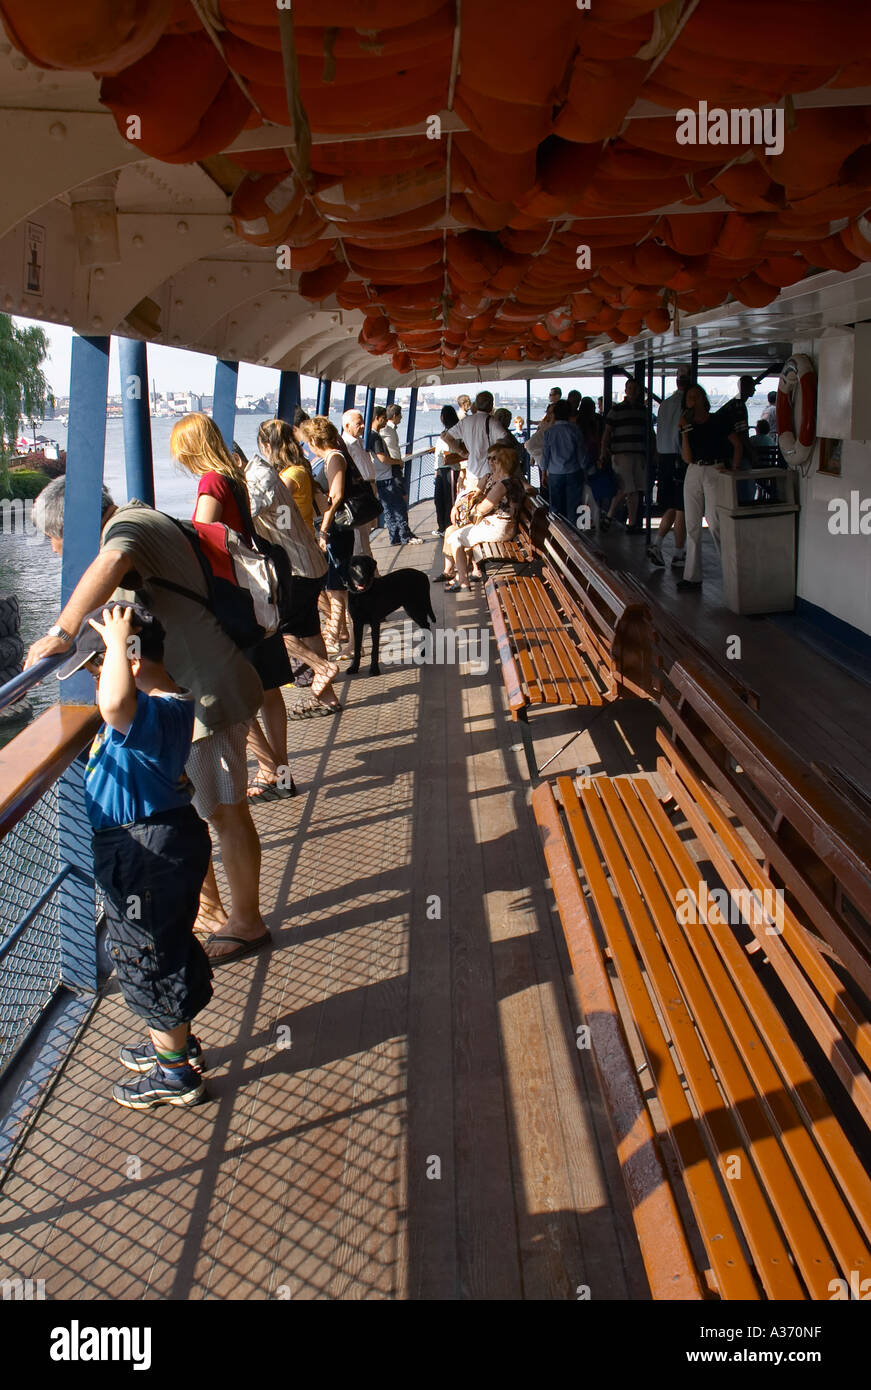 View of the interior and passengers of the Toronto Islands ferry. Stock Photo